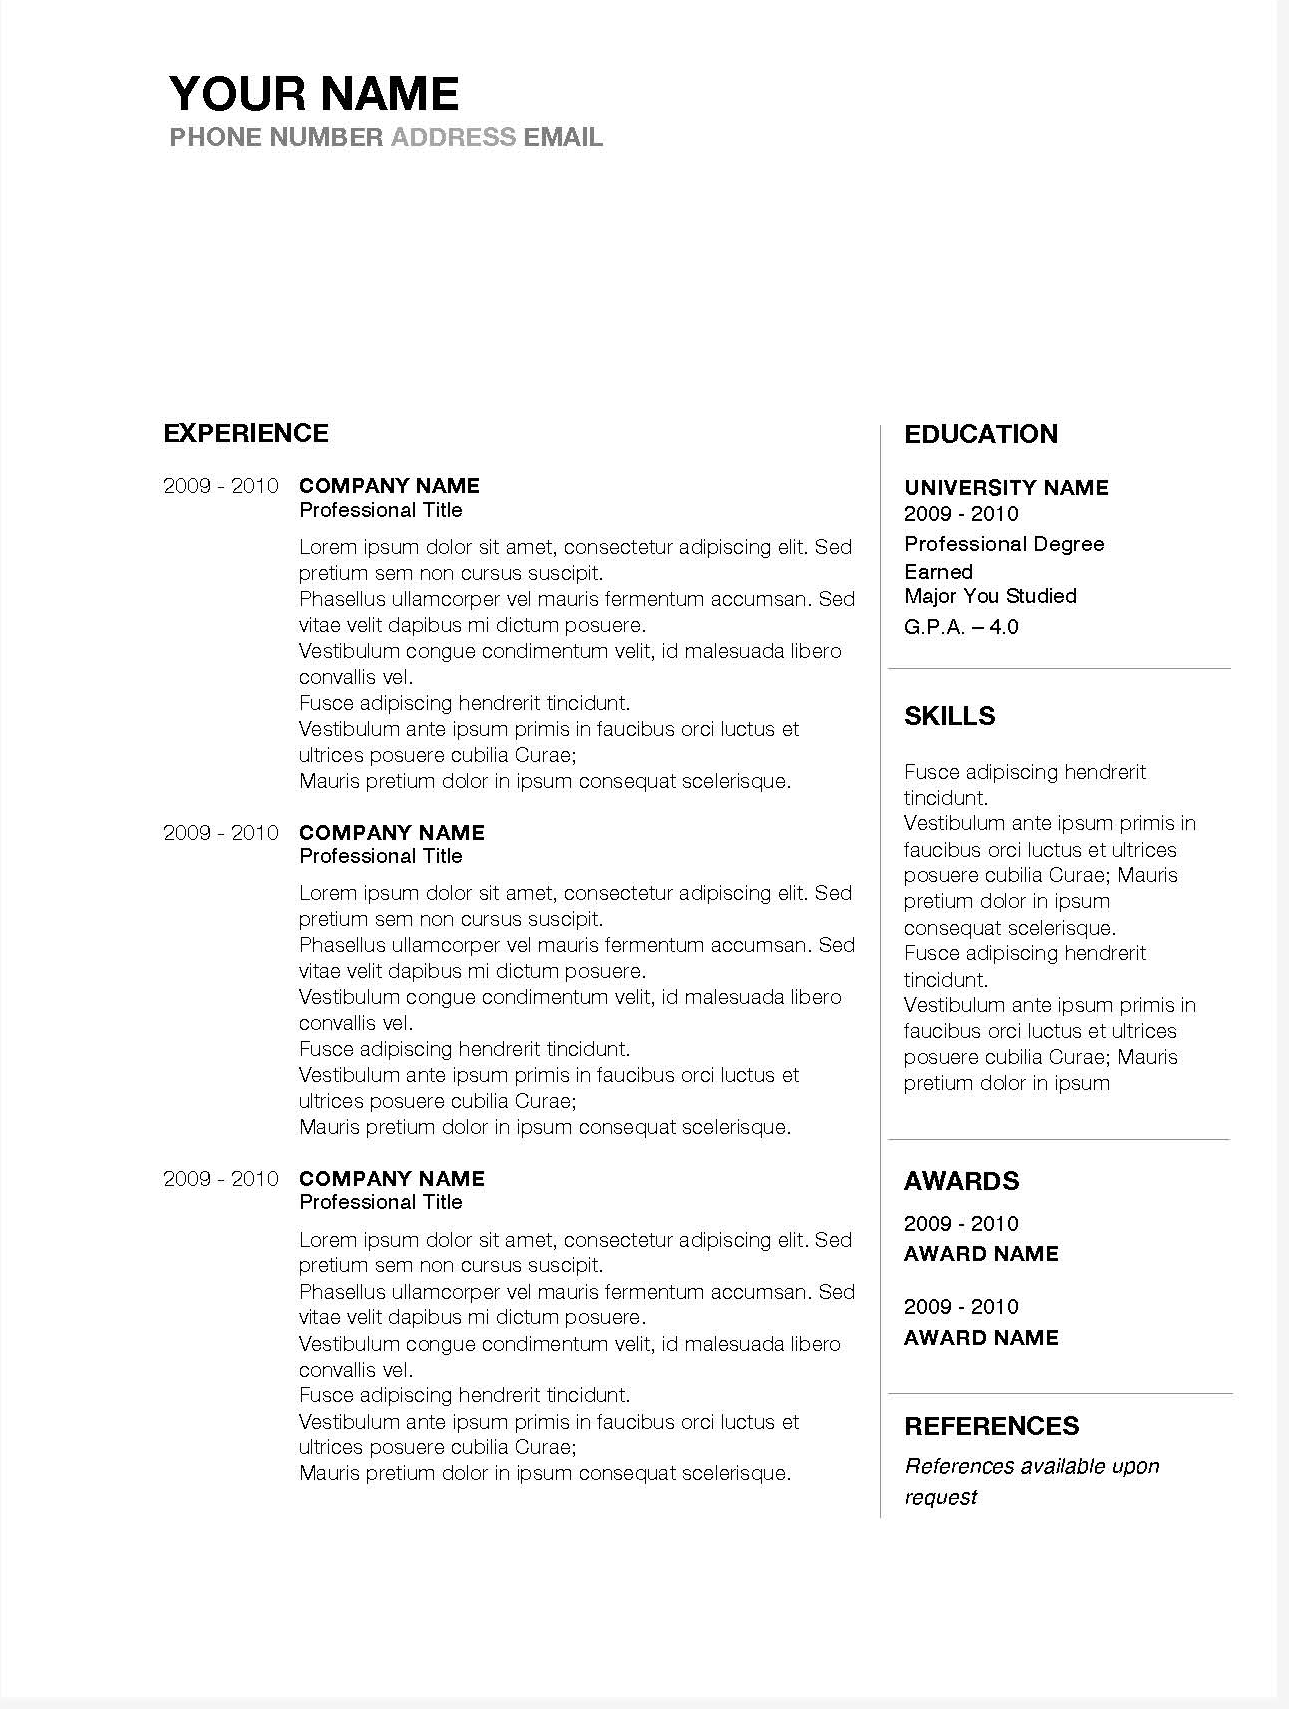 Space in Between - Downloadable Resume Template for Microsoft Word and Apple Pages